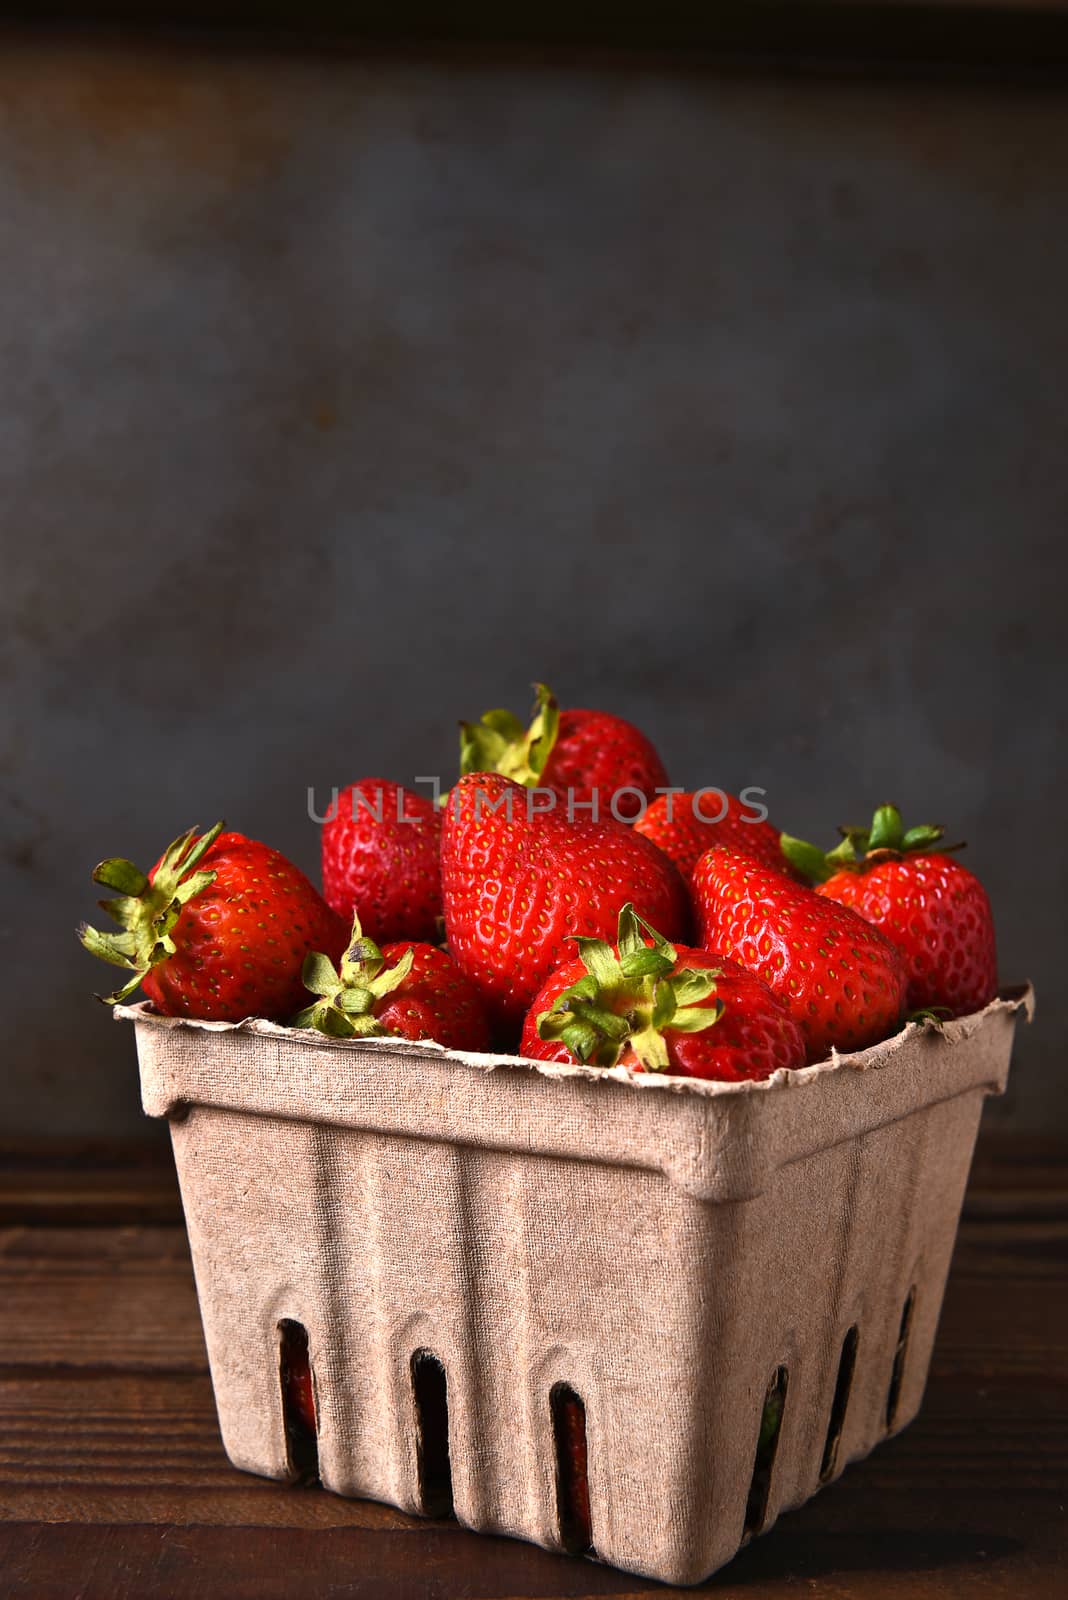 Still life of a cardboard produce container full of fresh picked strawberries on a wood table. Vertical format with copy space.